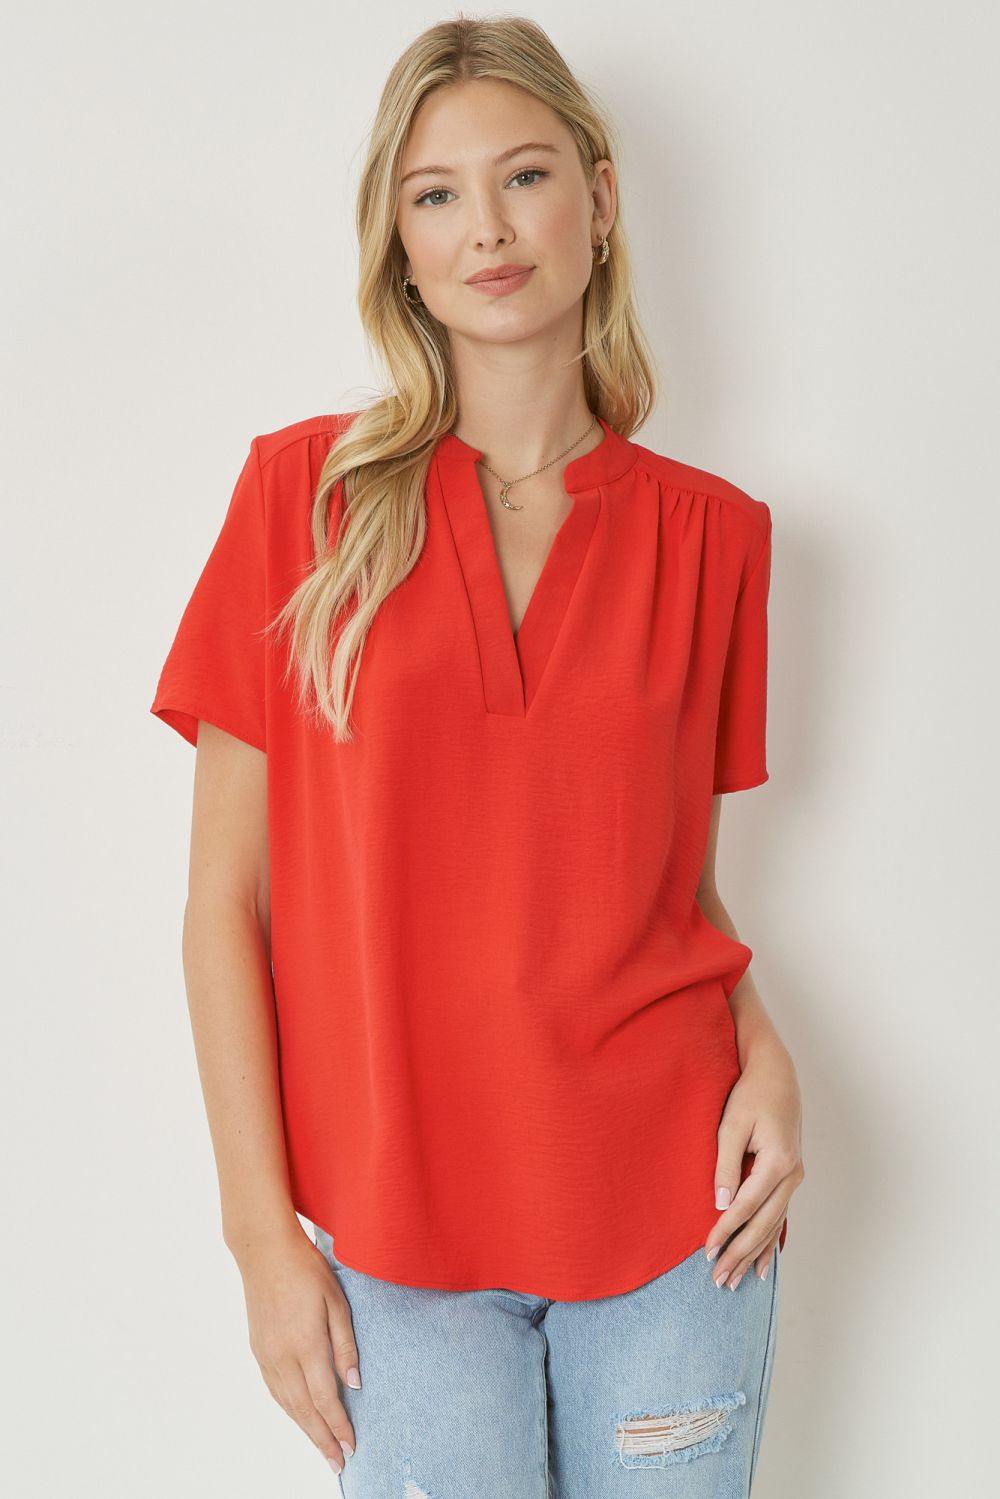 entro brand basic colorful tops Mock Collar Pleat Detailed red